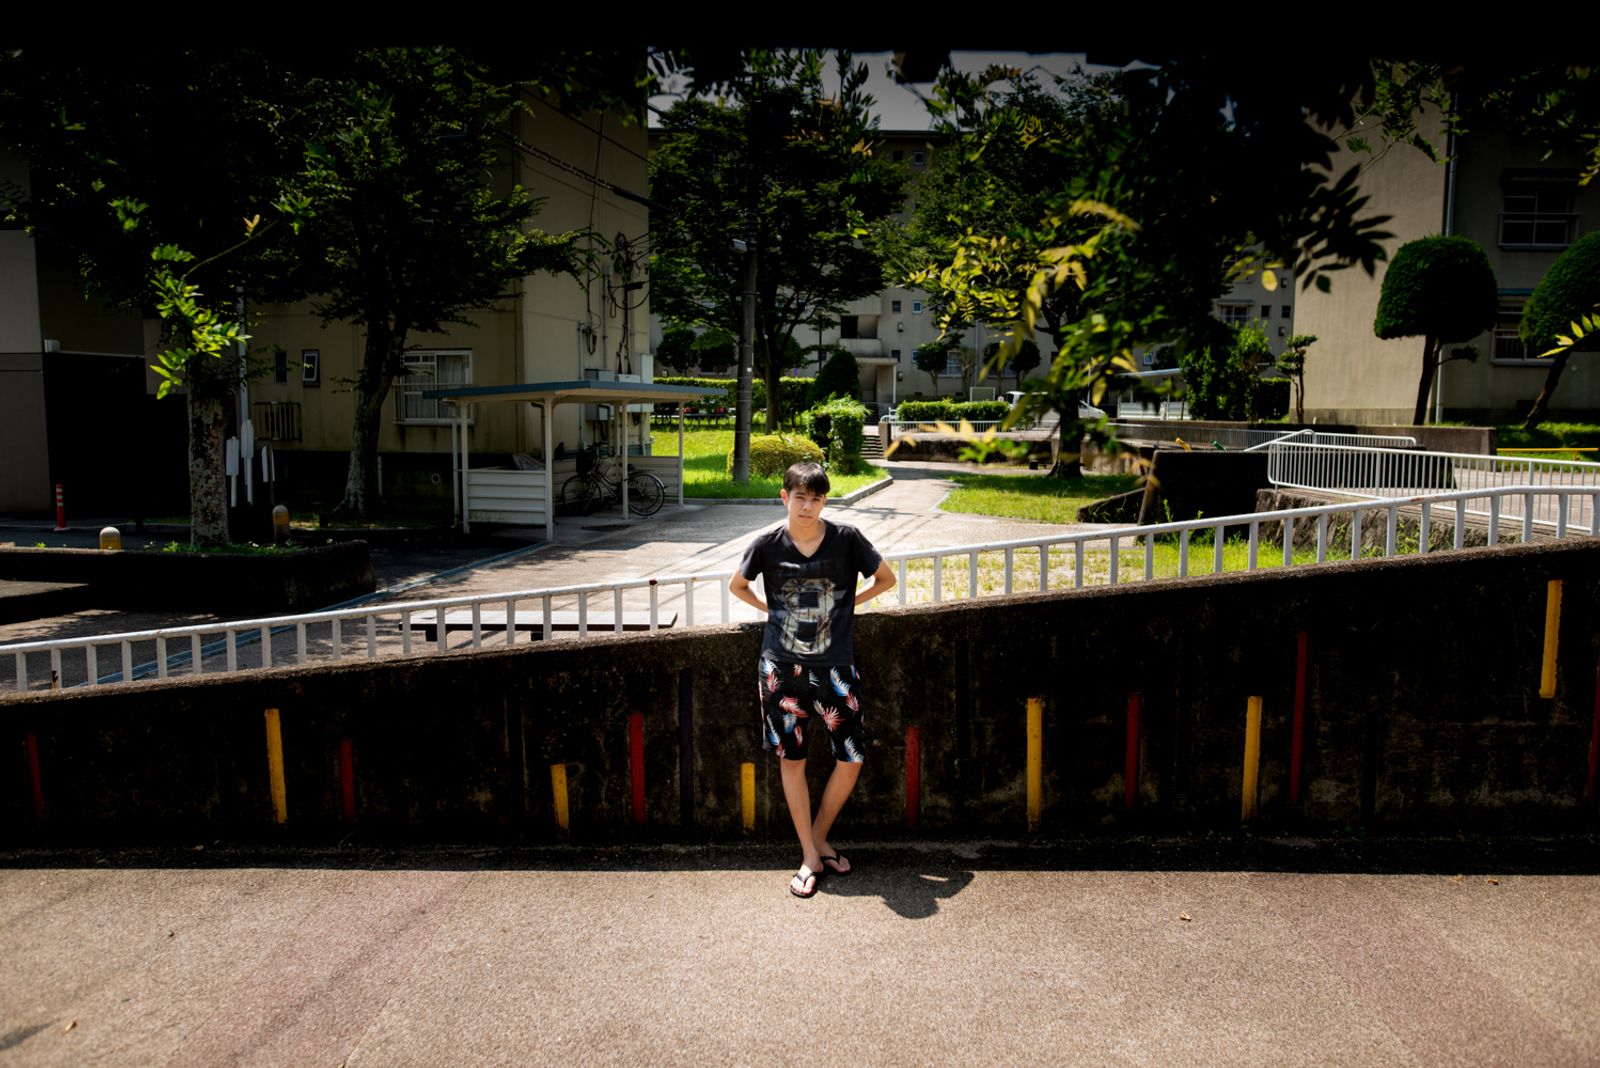 © hitomi hasegawa - Image from the Sunctuary of the housing complex photography project